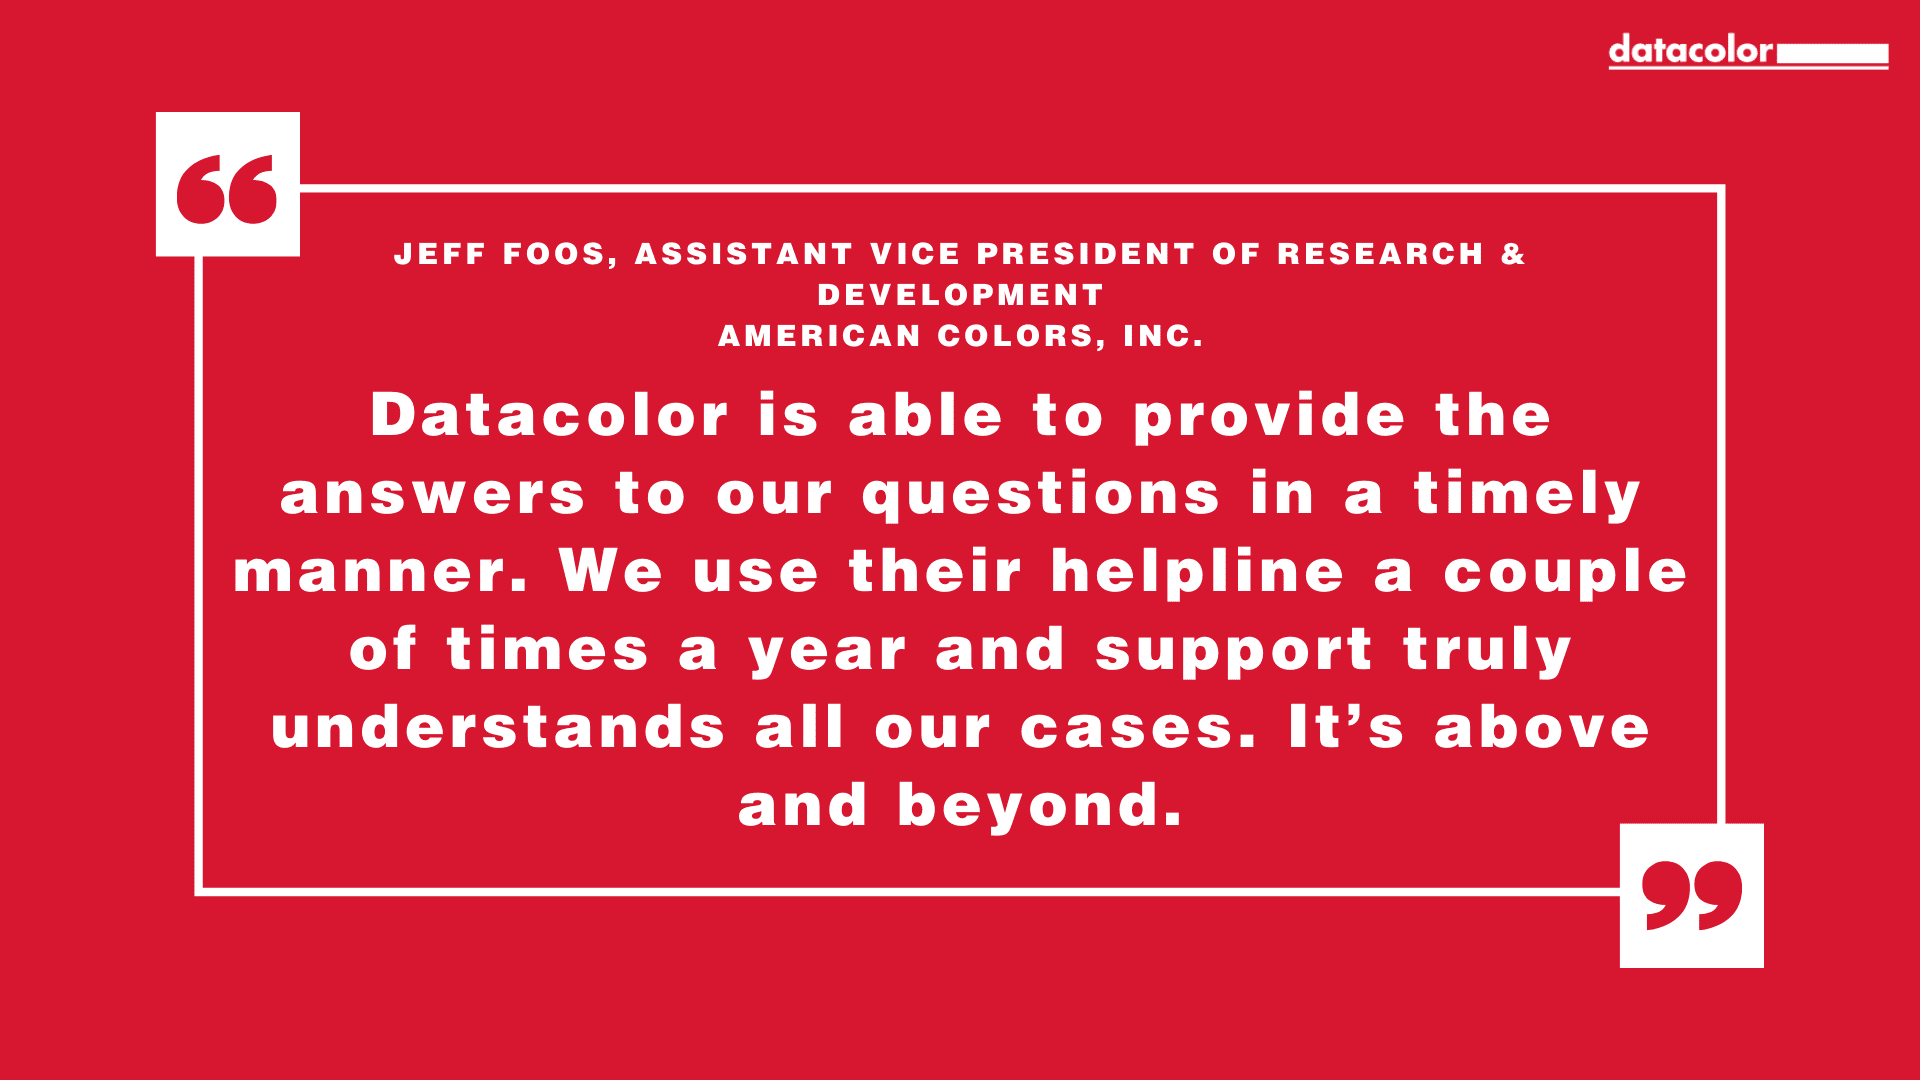 Jeff Foos, Assistant Vice President of Research & Development at American Colors